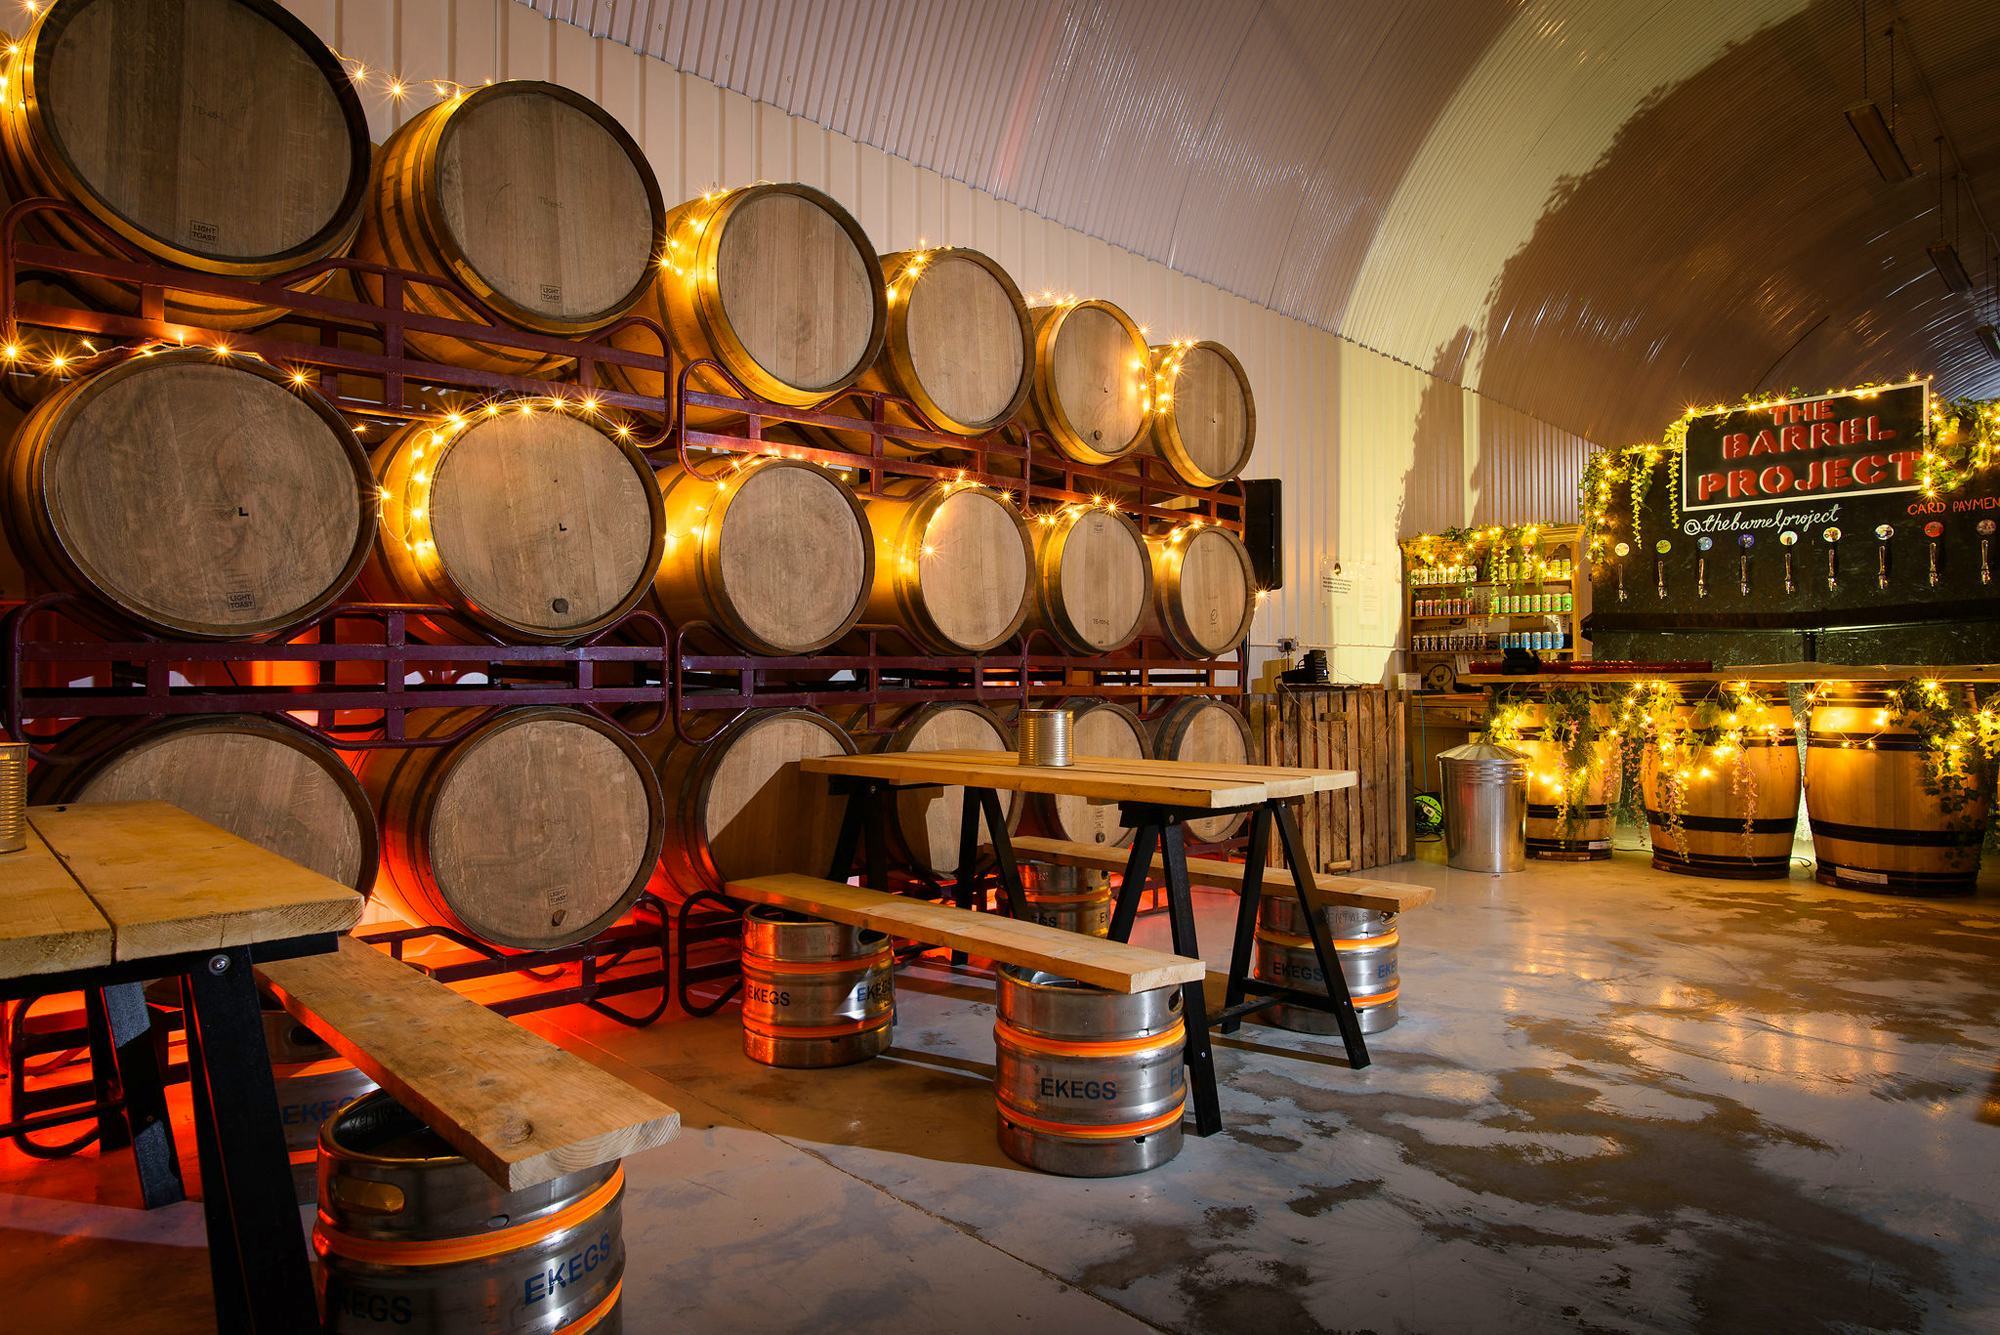 The Barrel Project by London Beer Factory launches in a Bermondsey arch all set to host events with beers on tap